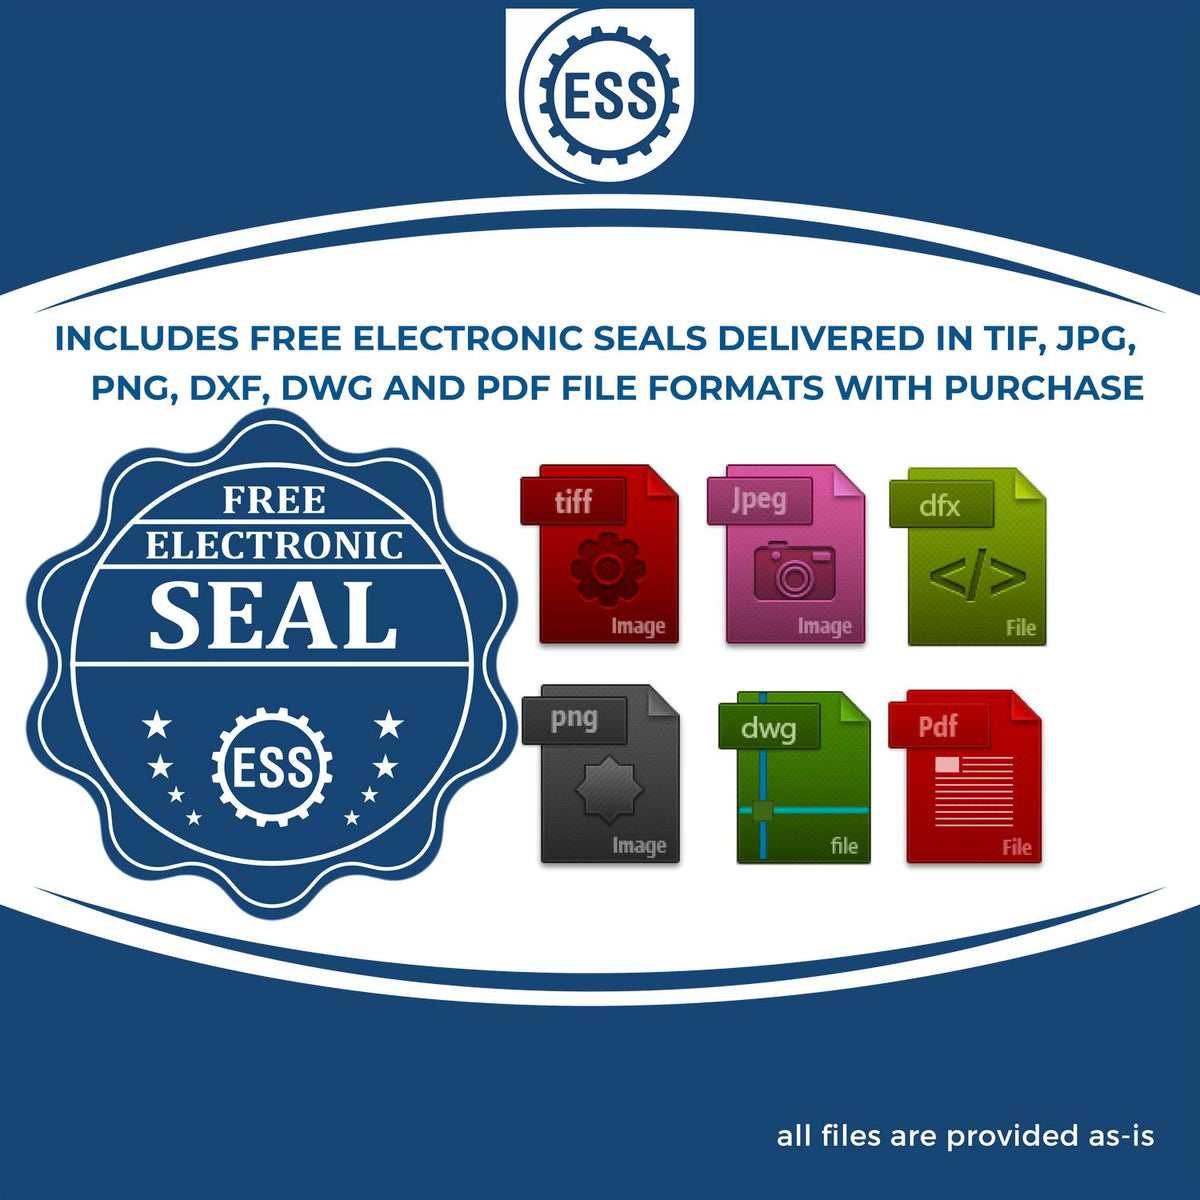 An infographic for the free electronic seal for the Gift Virginia Landscape Architect Seal illustrating the different file type icons such as DXF, DWG, TIF, JPG and PNG.